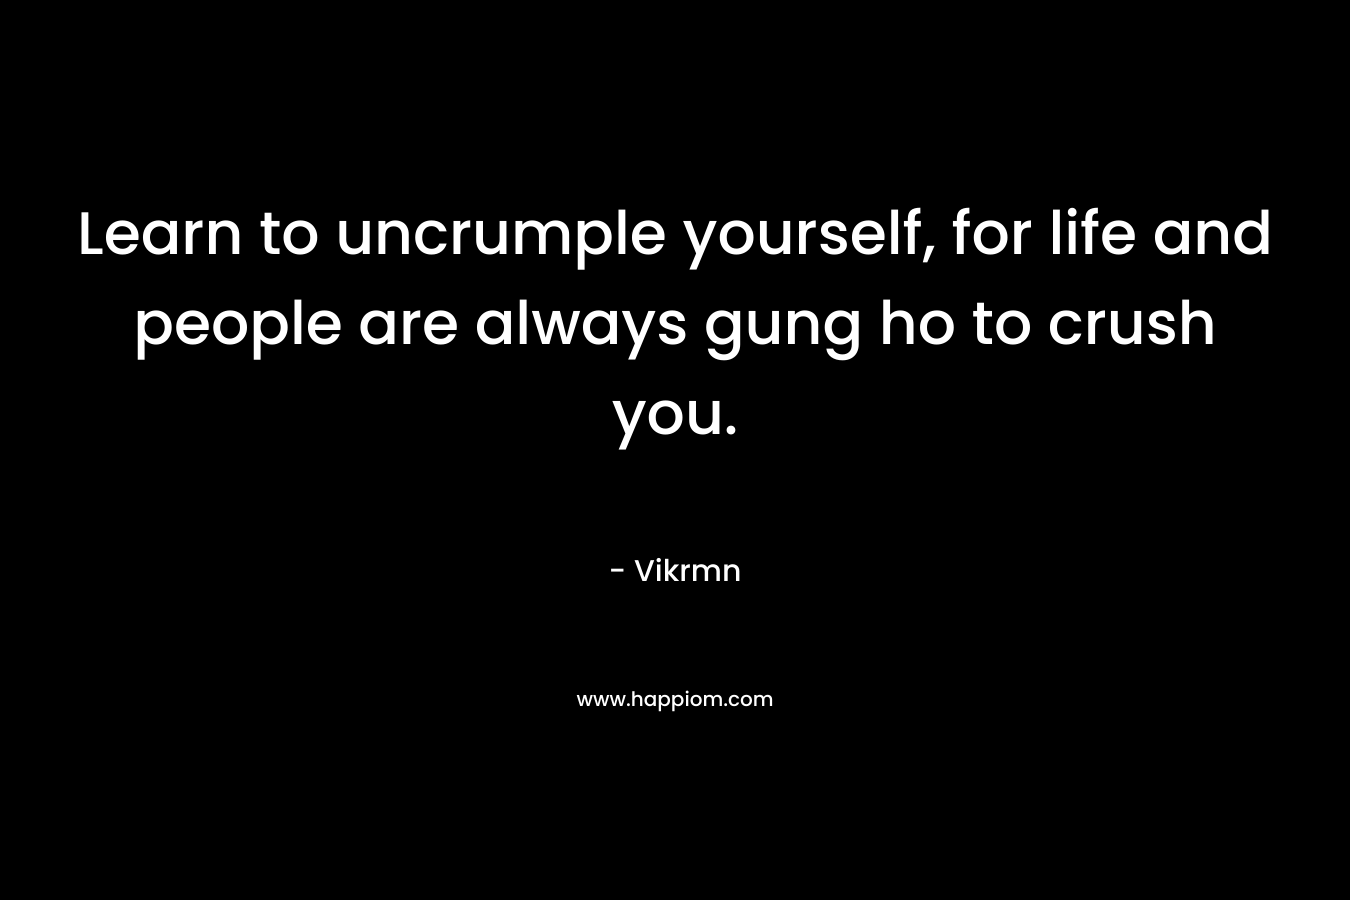 Learn to uncrumple yourself, for life and people are always gung ho to crush you.